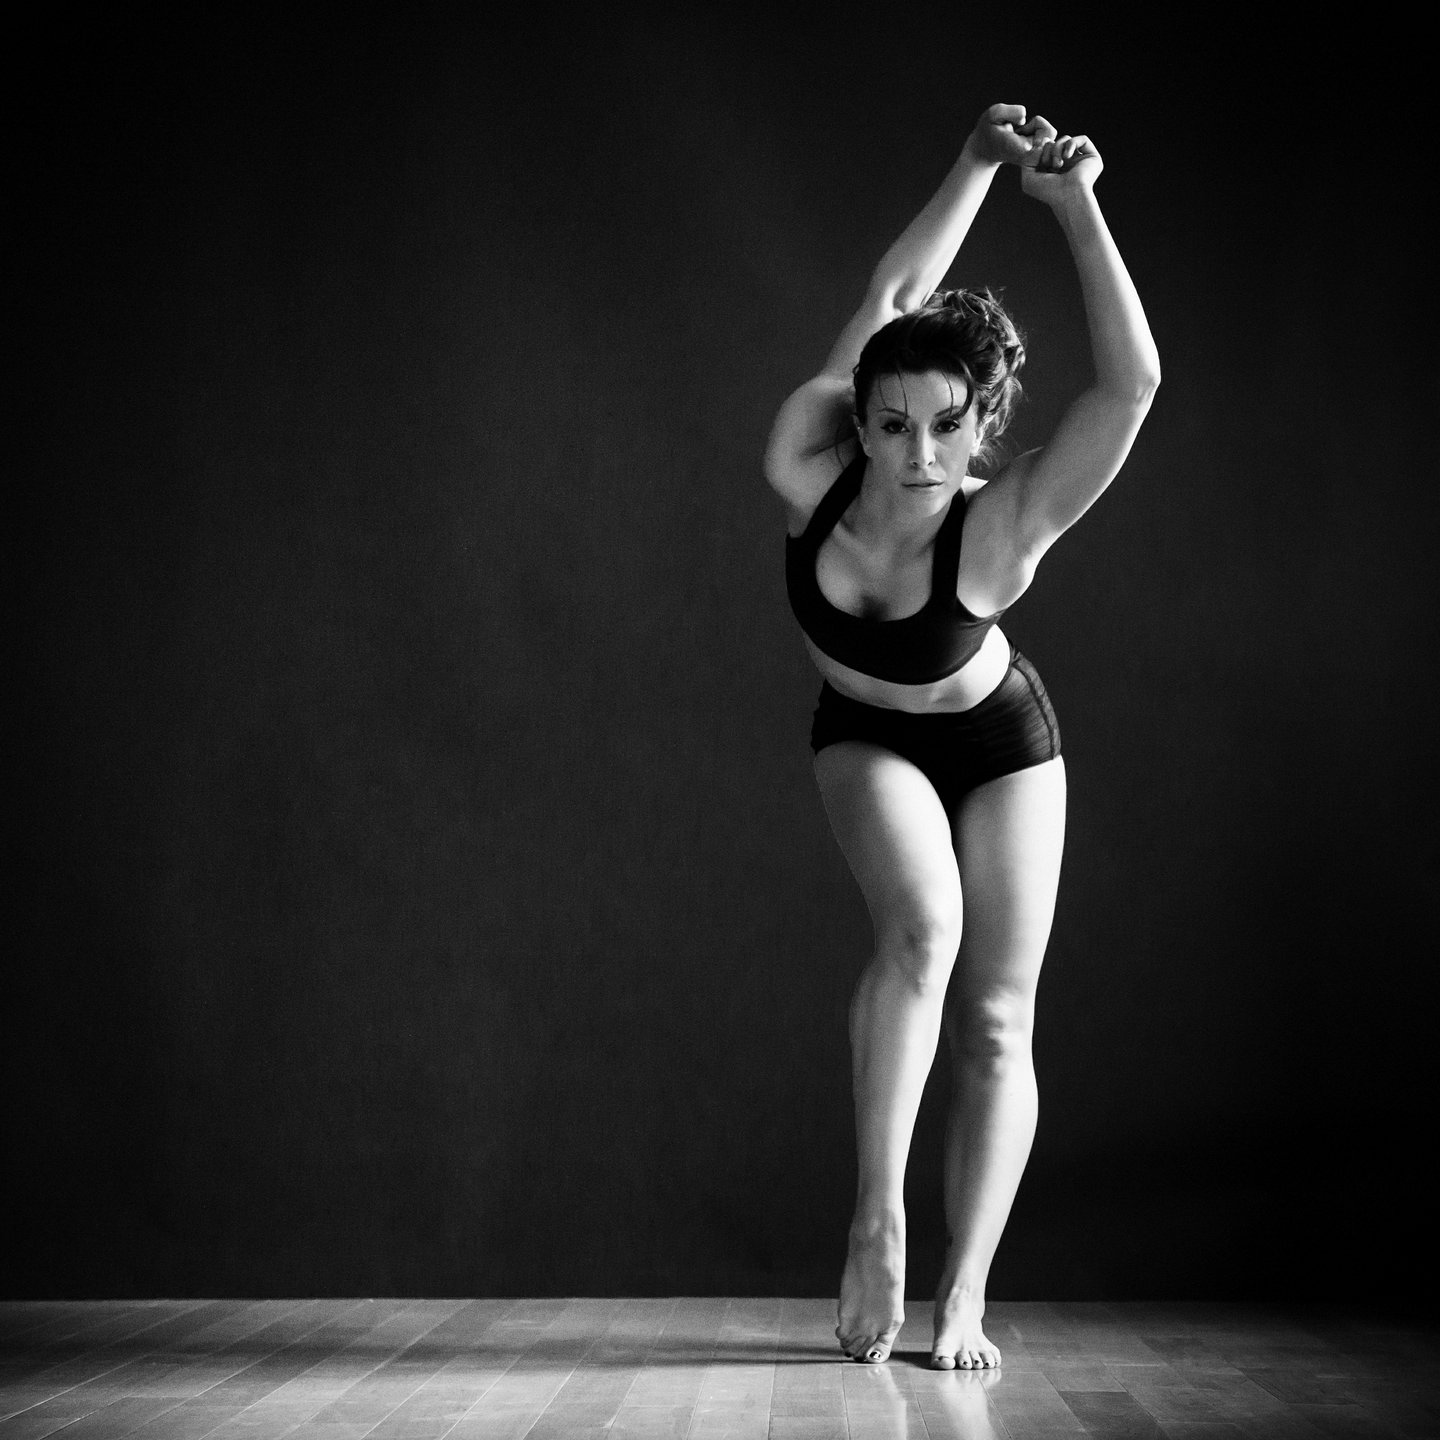 Los Angeles Dance Portrait Photo - Stephanie Abrams - by Tommy Xing Photography 09.jpg